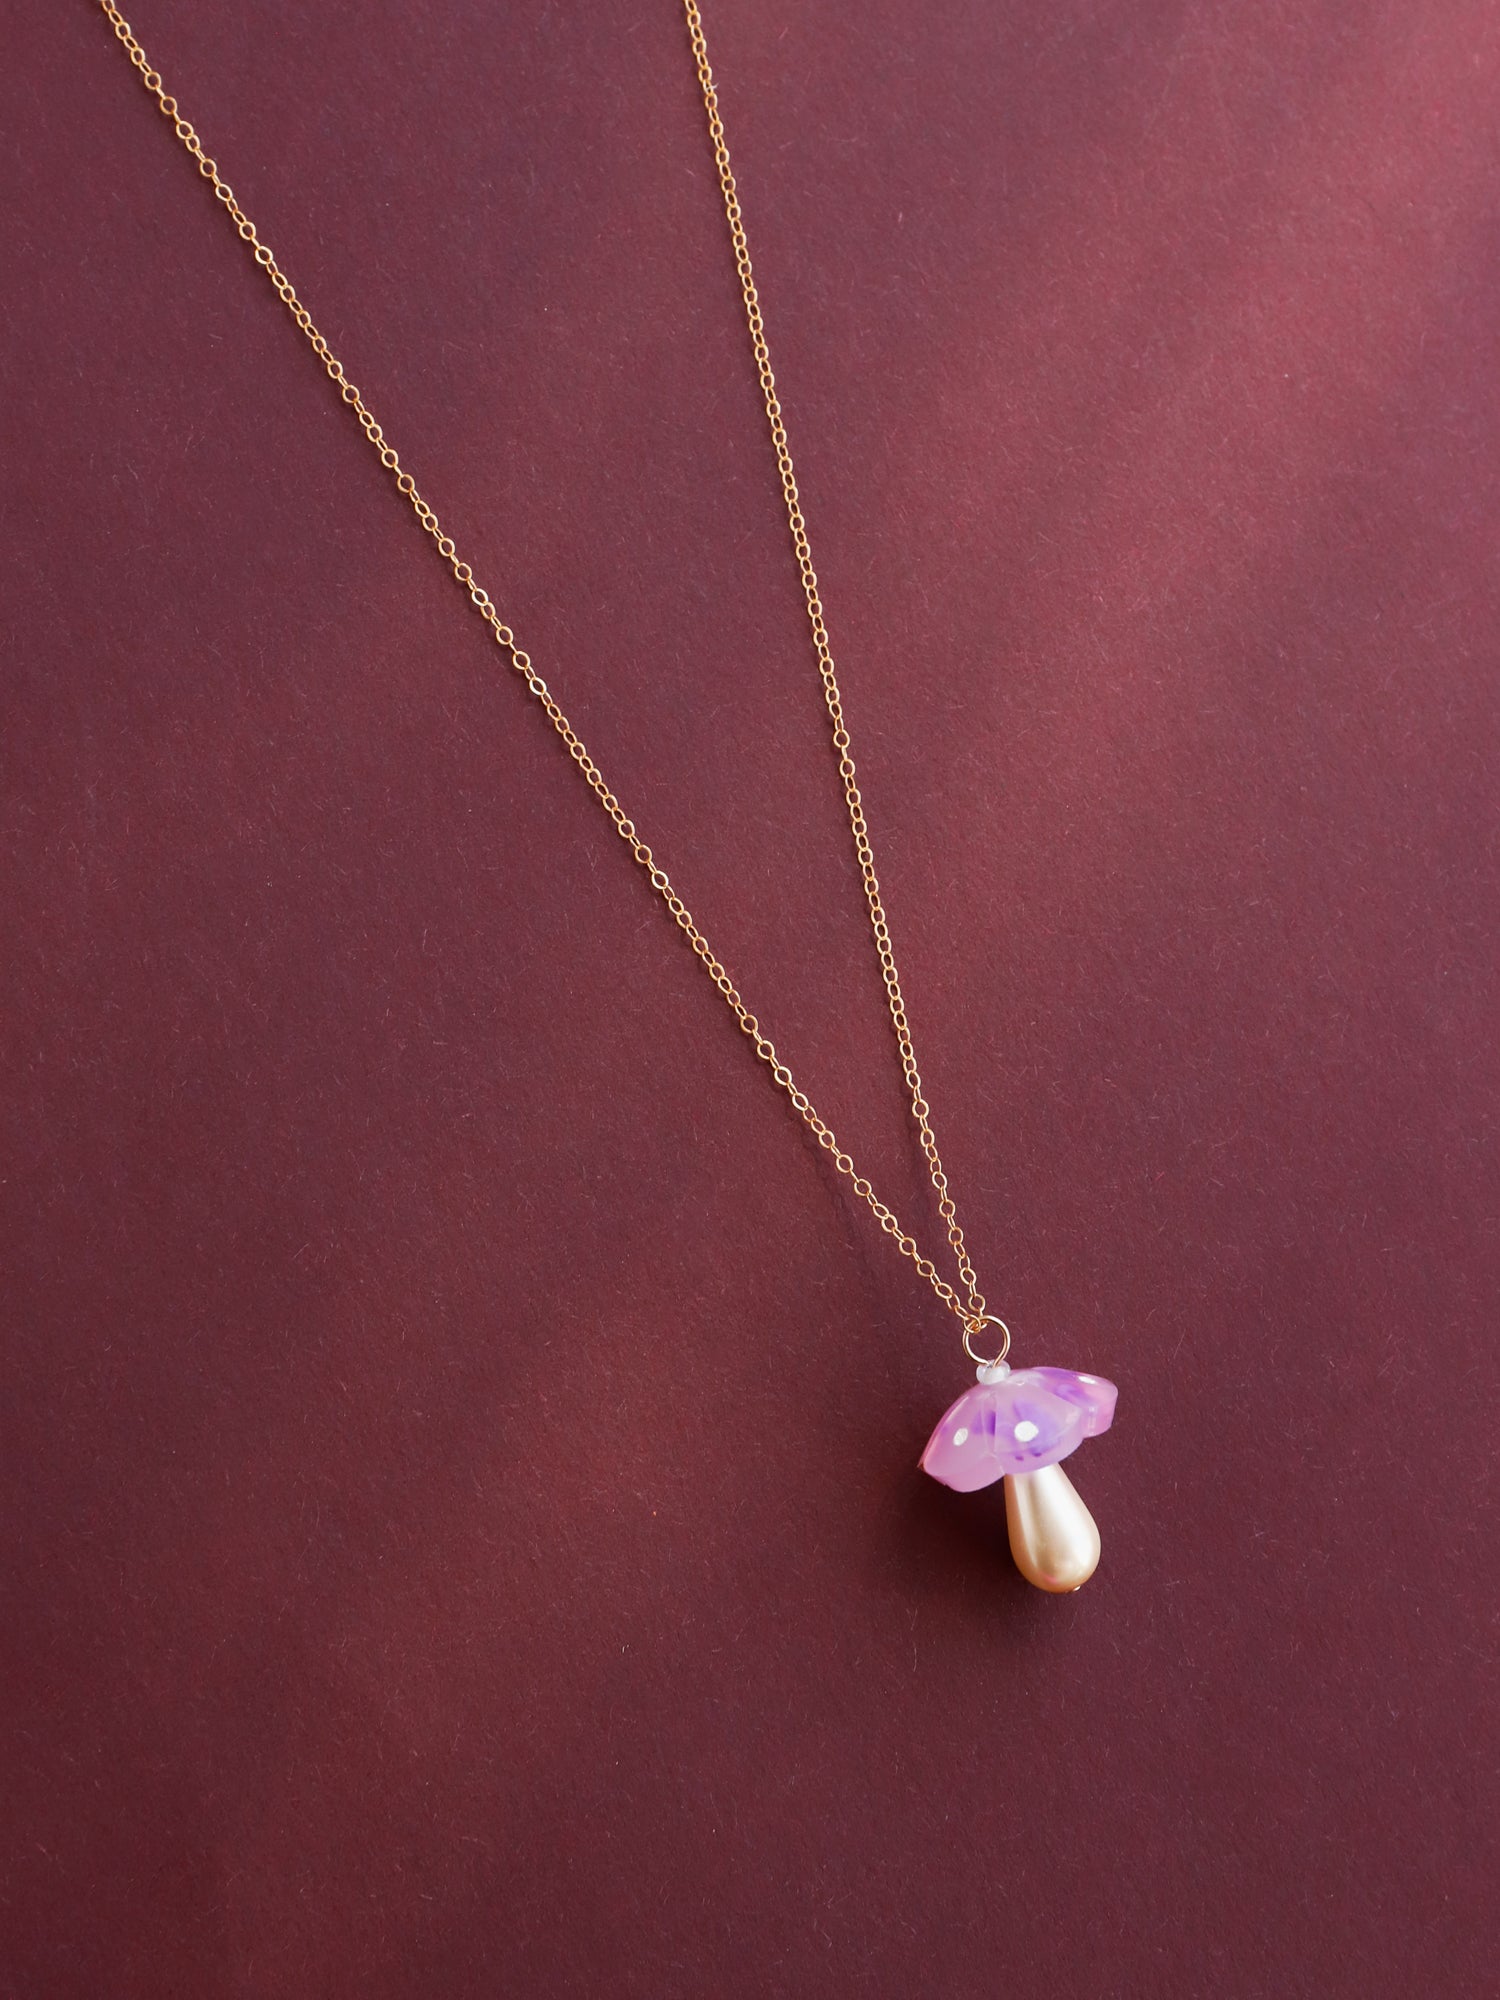 Lavender mushroom pendant necklace. Made from heat-formed speckled acrylic with hand-inked details and finished off with a high quality Czech glass pearl. Pendant is hung on a high quality 50cm 14k gold-filled chain. Handmade in the UK by Wolf & Moon.